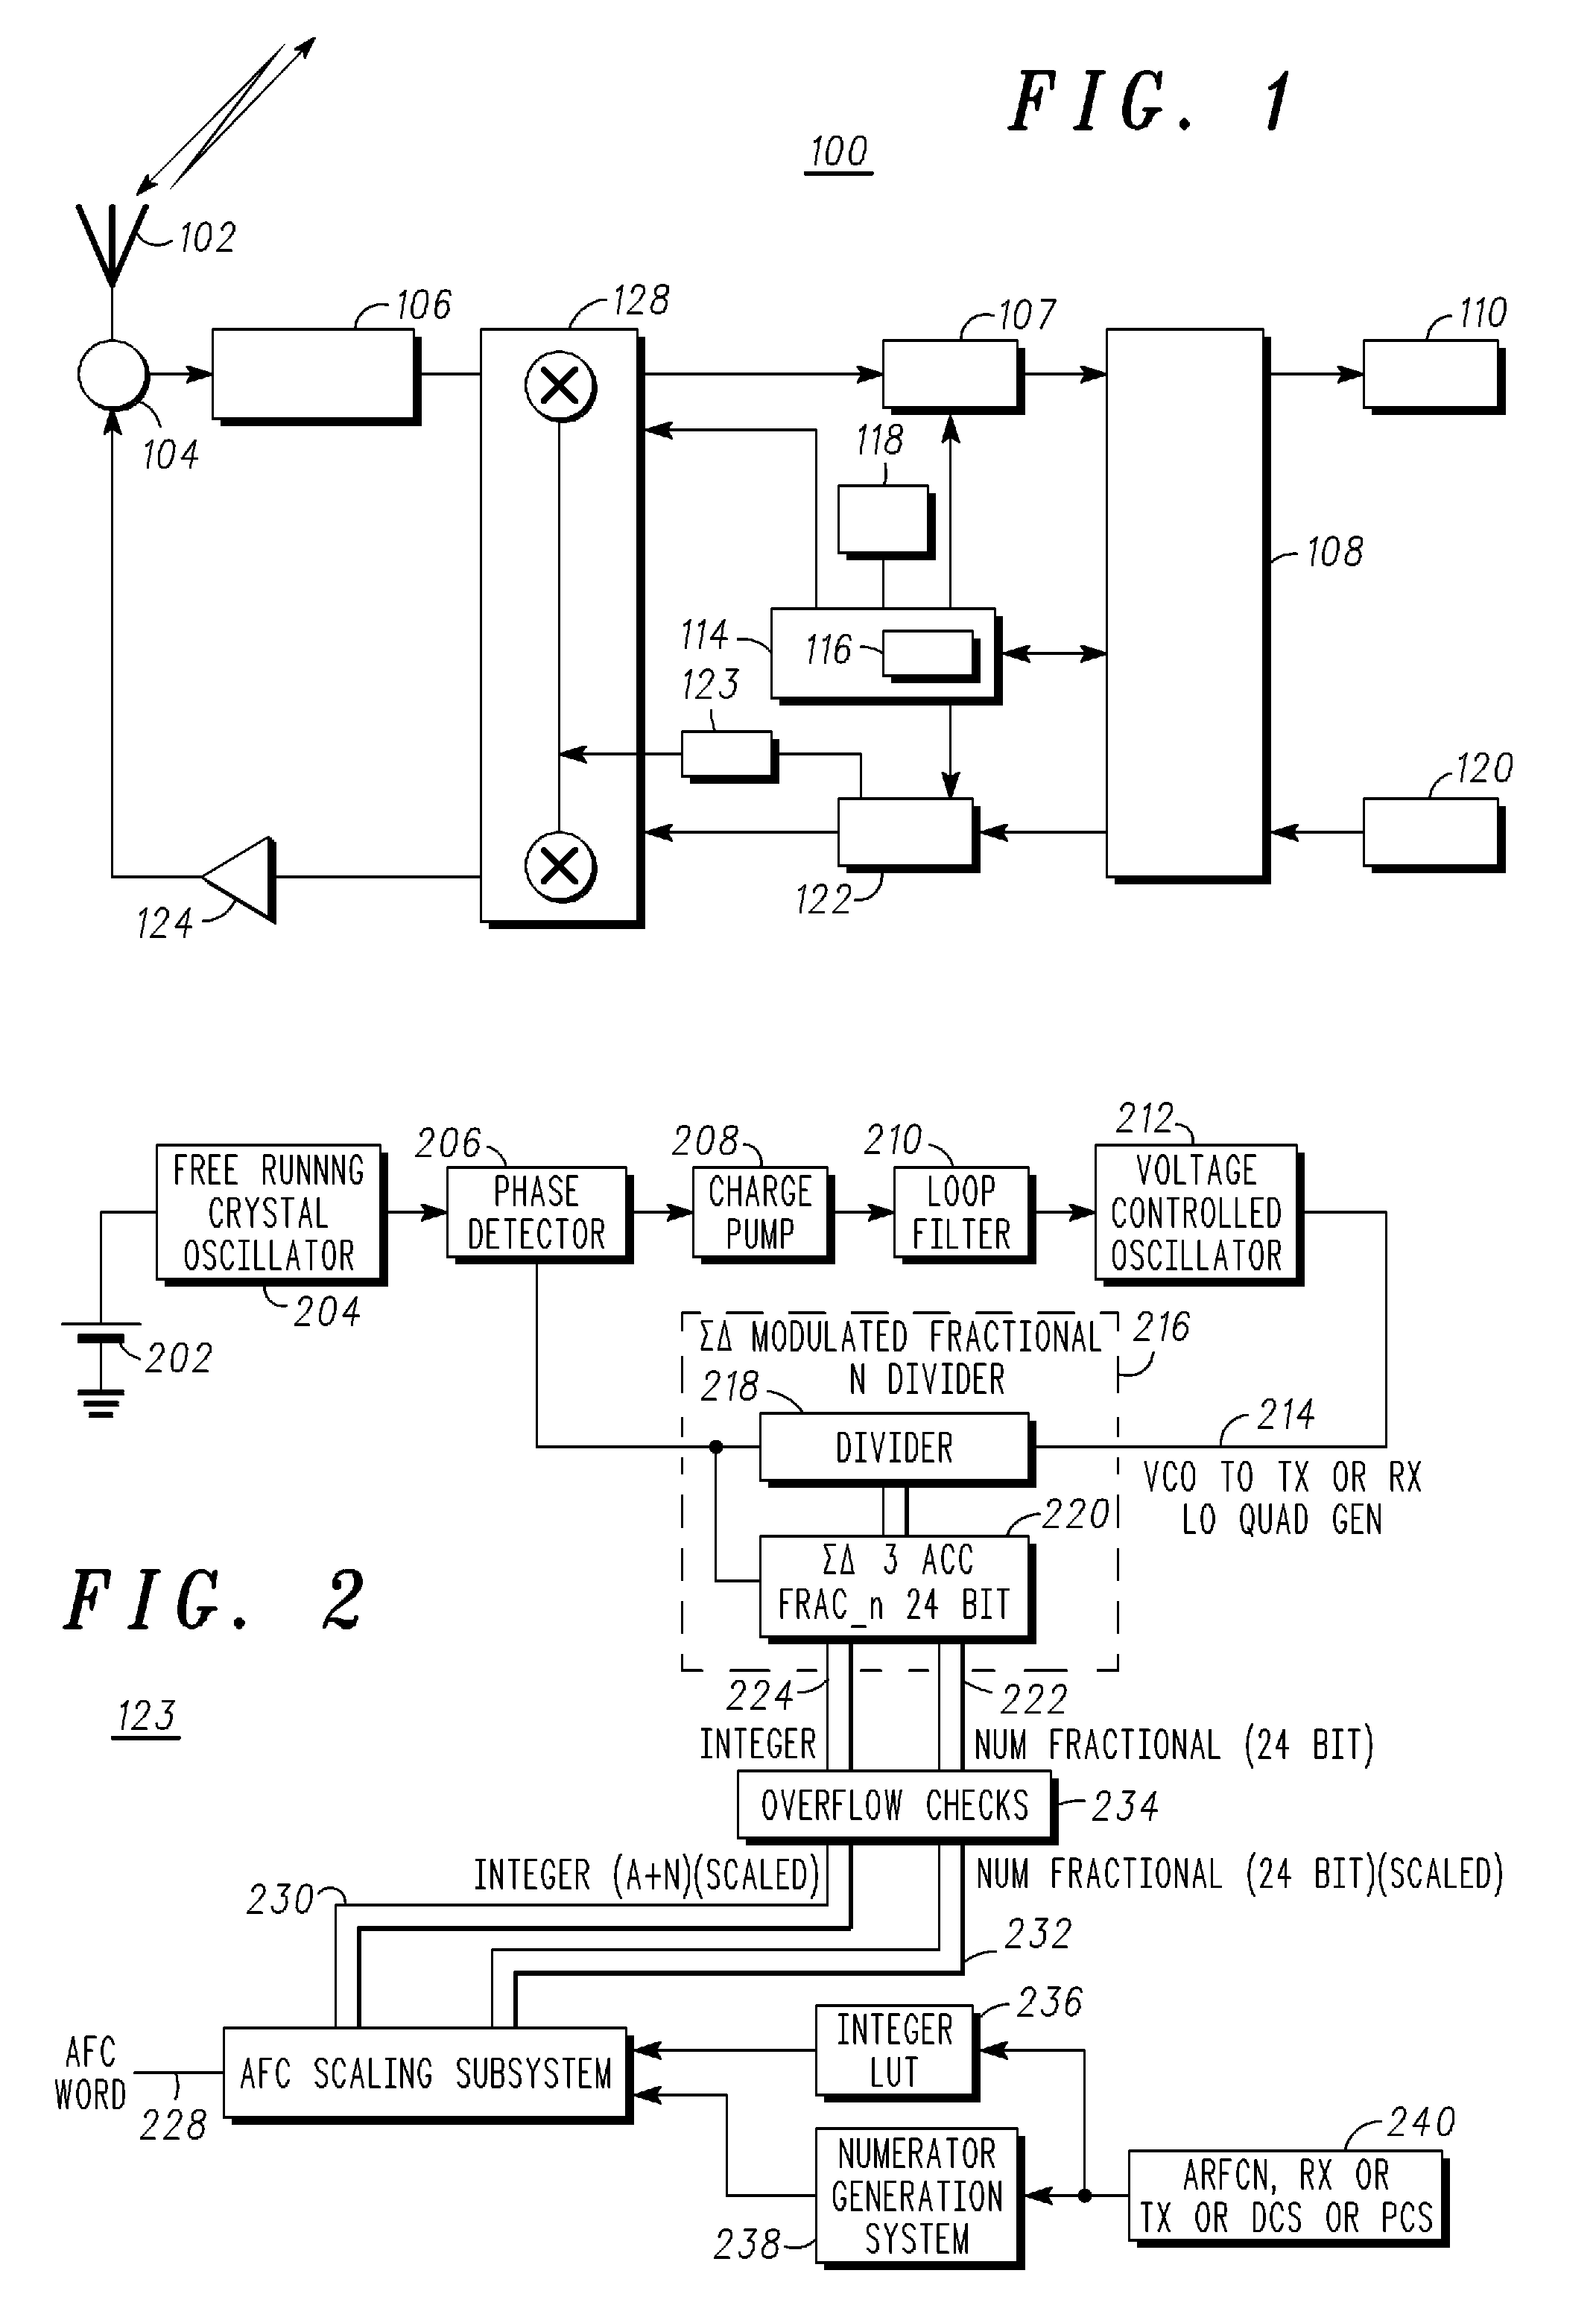 Frequency generation in a wireless communication unit